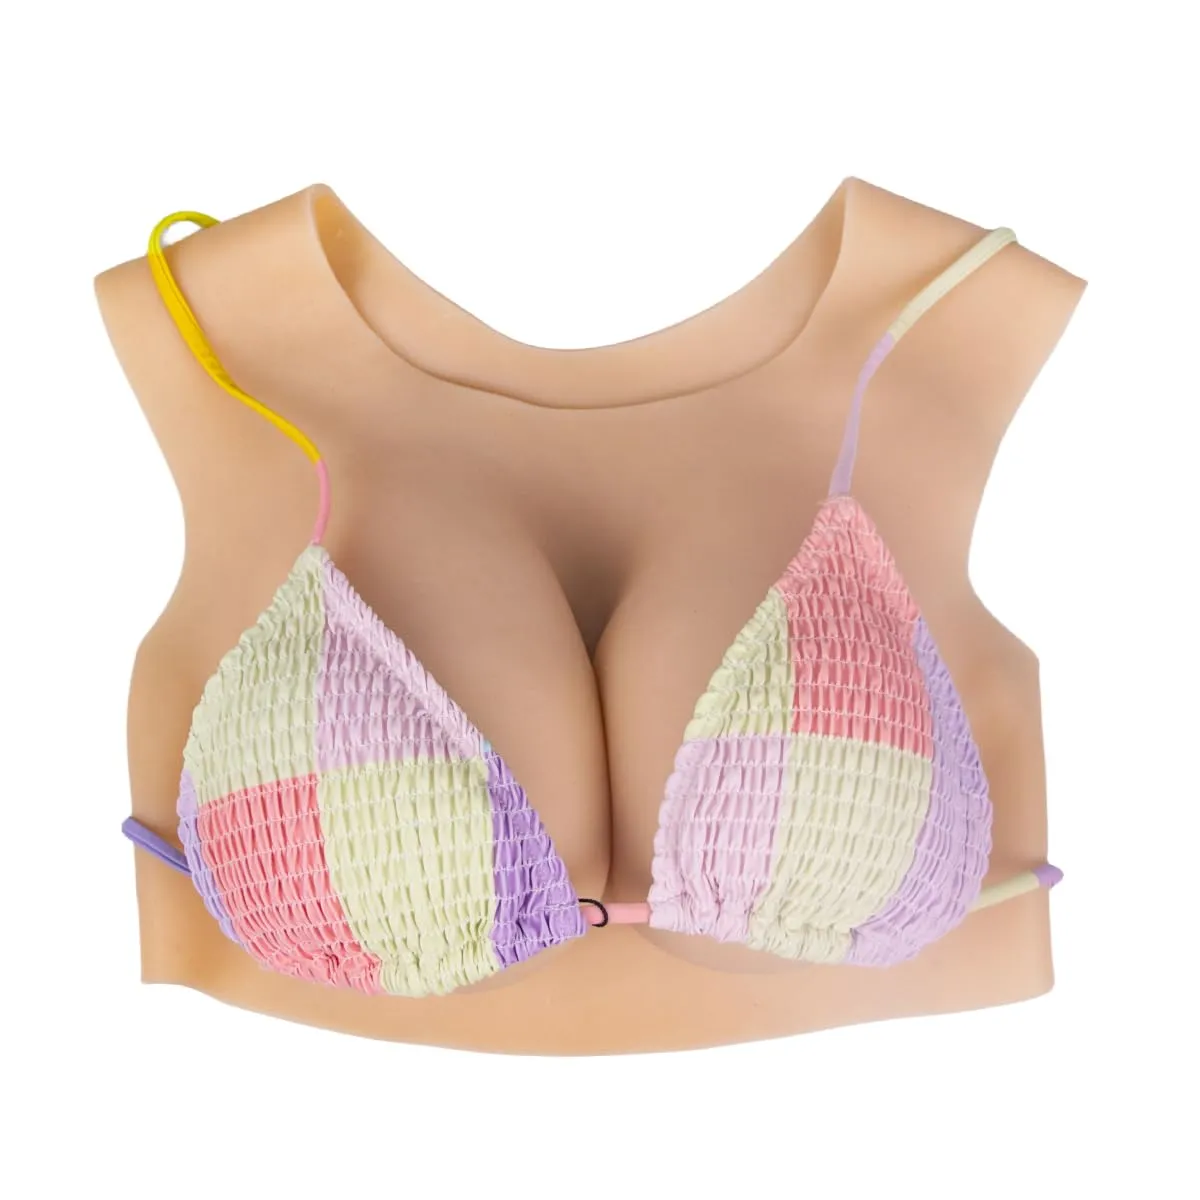  Silicone Filled Bib G - Cup Breast Breast Shape